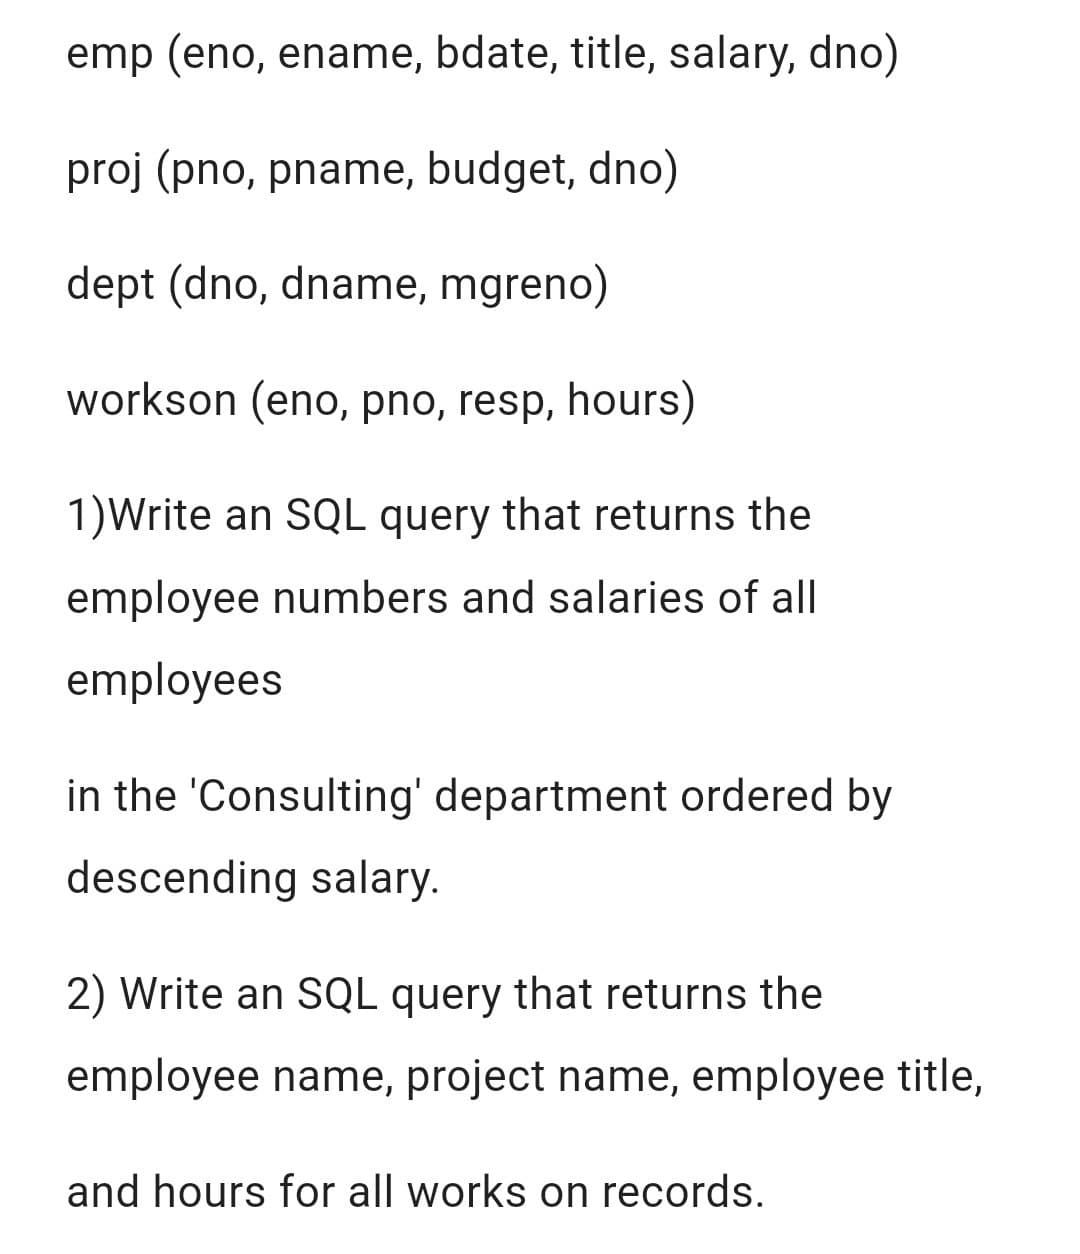 emp (eno, ename, bdate, title, salary, dno)
proj (pno, pname, budget, dno)
dept (dno, dname, mgreno)
workson (eno, pno, resp, hours)
1)Write an SQL query that returns the
employee numbers and salaries of all
employees
in the 'Consulting' department ordered by
descending salary.
2) Write an SQL query that returns the
employee name, project name, employee title,
and hours for all works on records.